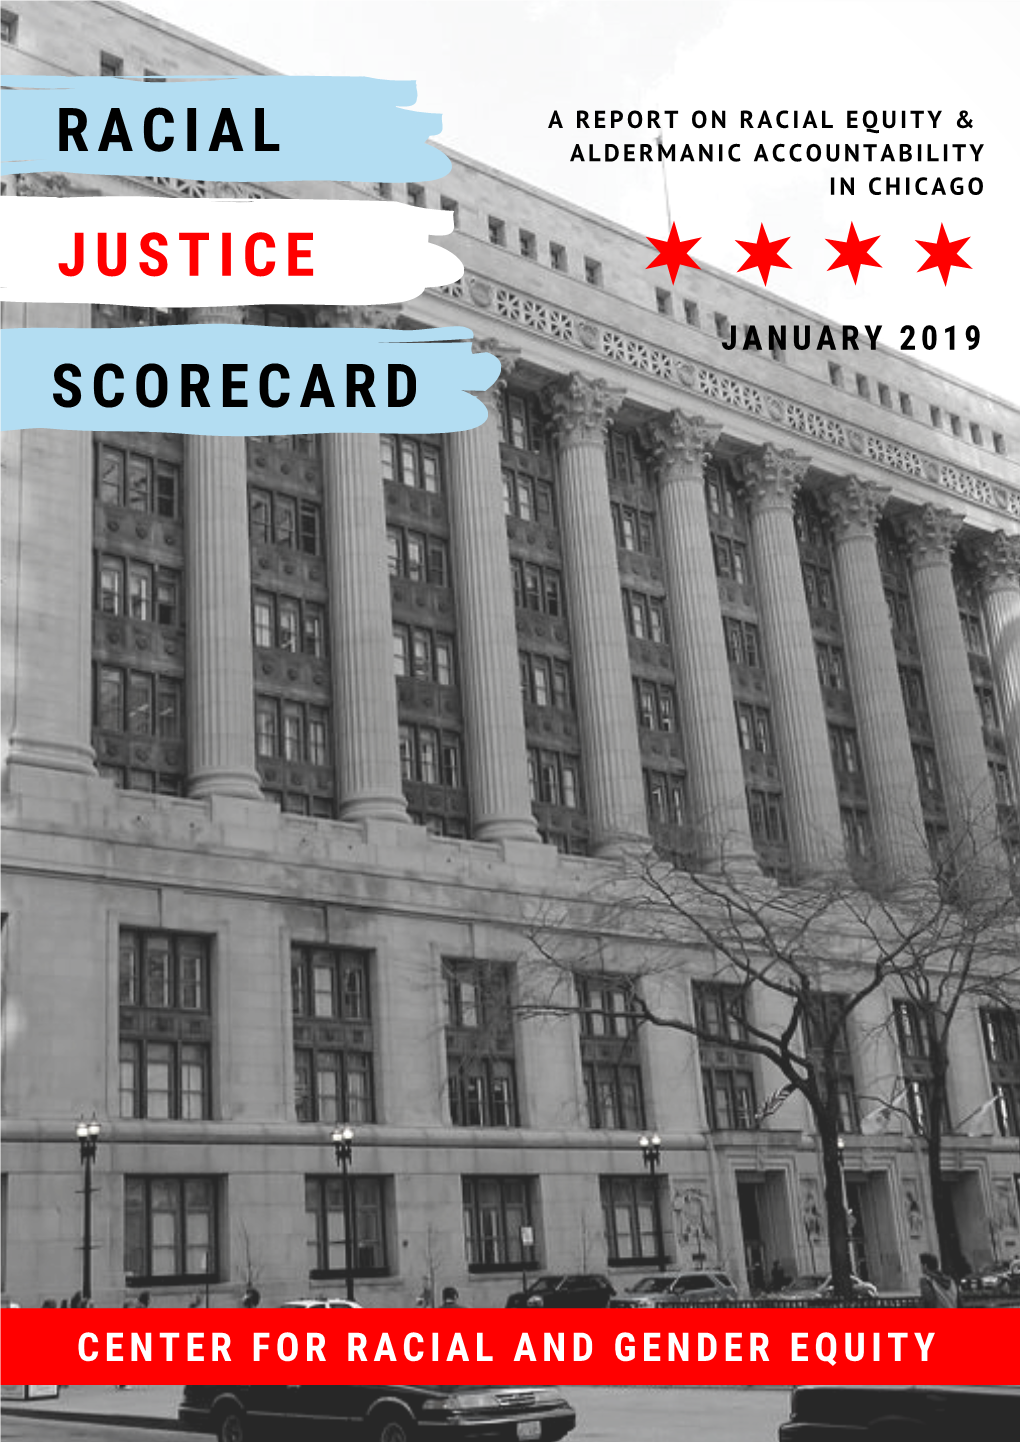 Racial Justice Scorecard Is Activities Within the Current Aldermanic Designed to Serve As an Informational Term, Which Began in May 2015